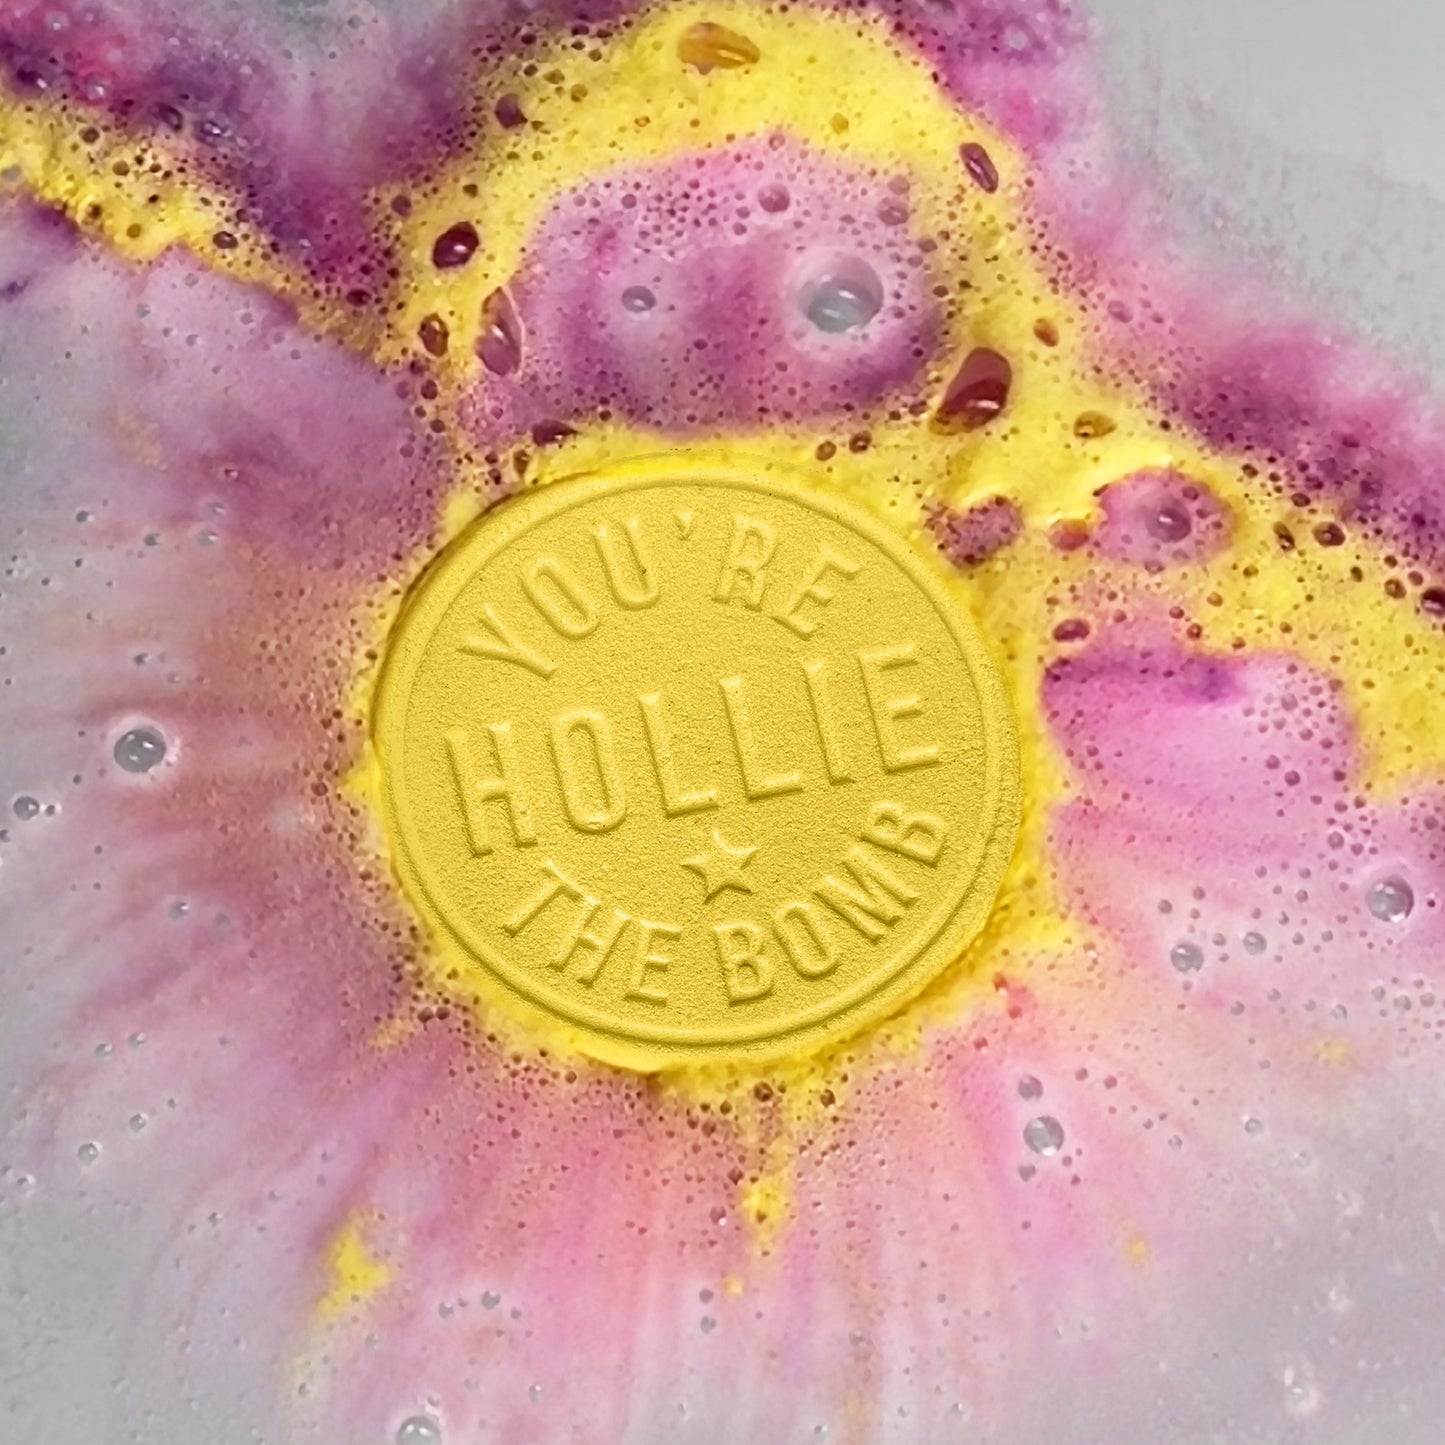 H&H Personalised Scented Bath Bombs - Lola